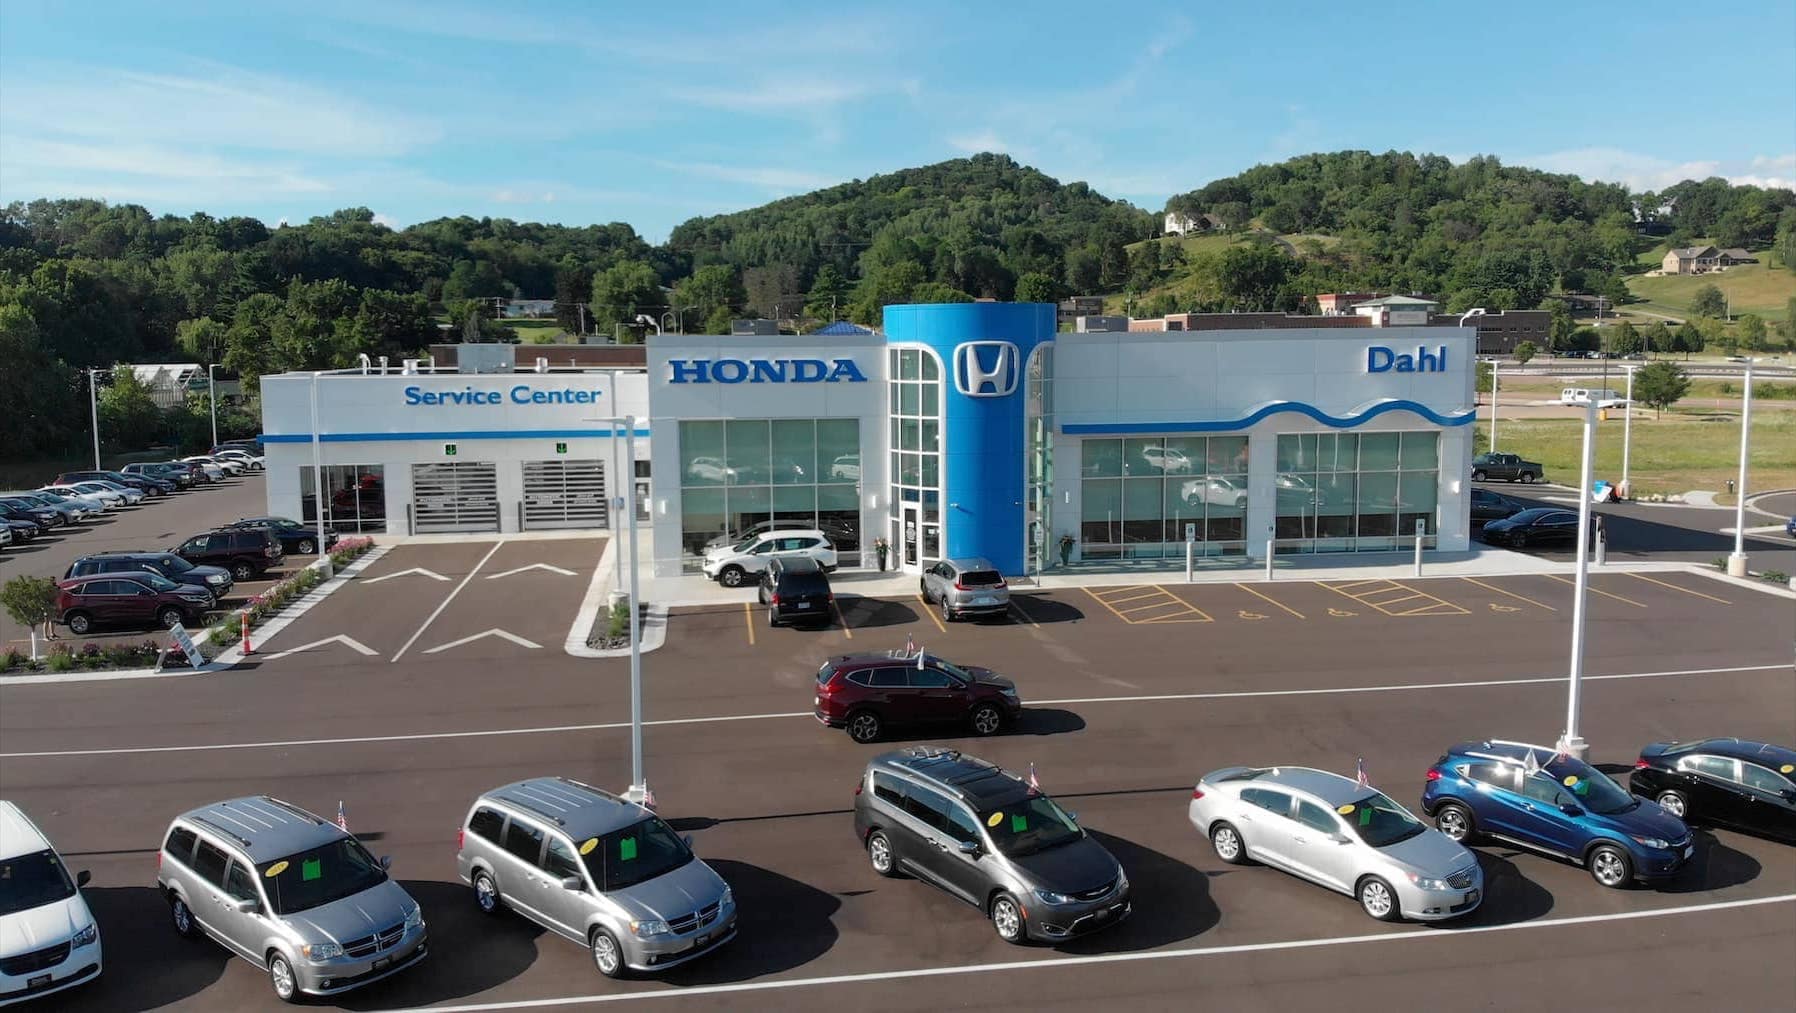 An exterior shot of a Honda dealership during the day.